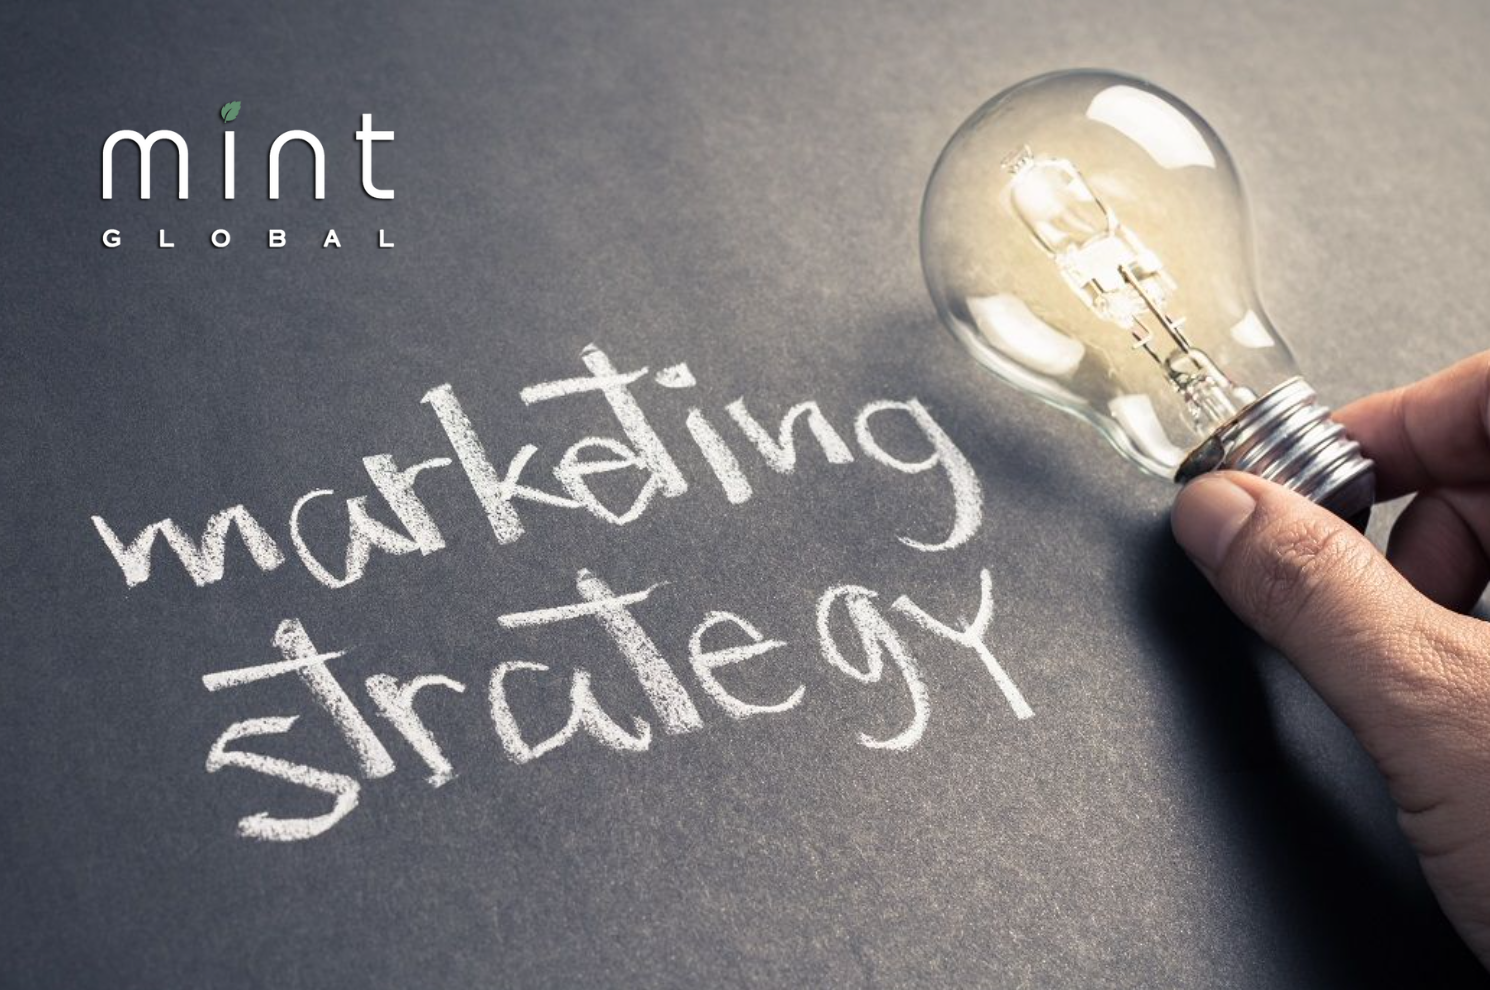 Honest Review: Mint Global Marketing Is A Top Agency That Can Transform Your Marketing Strategy